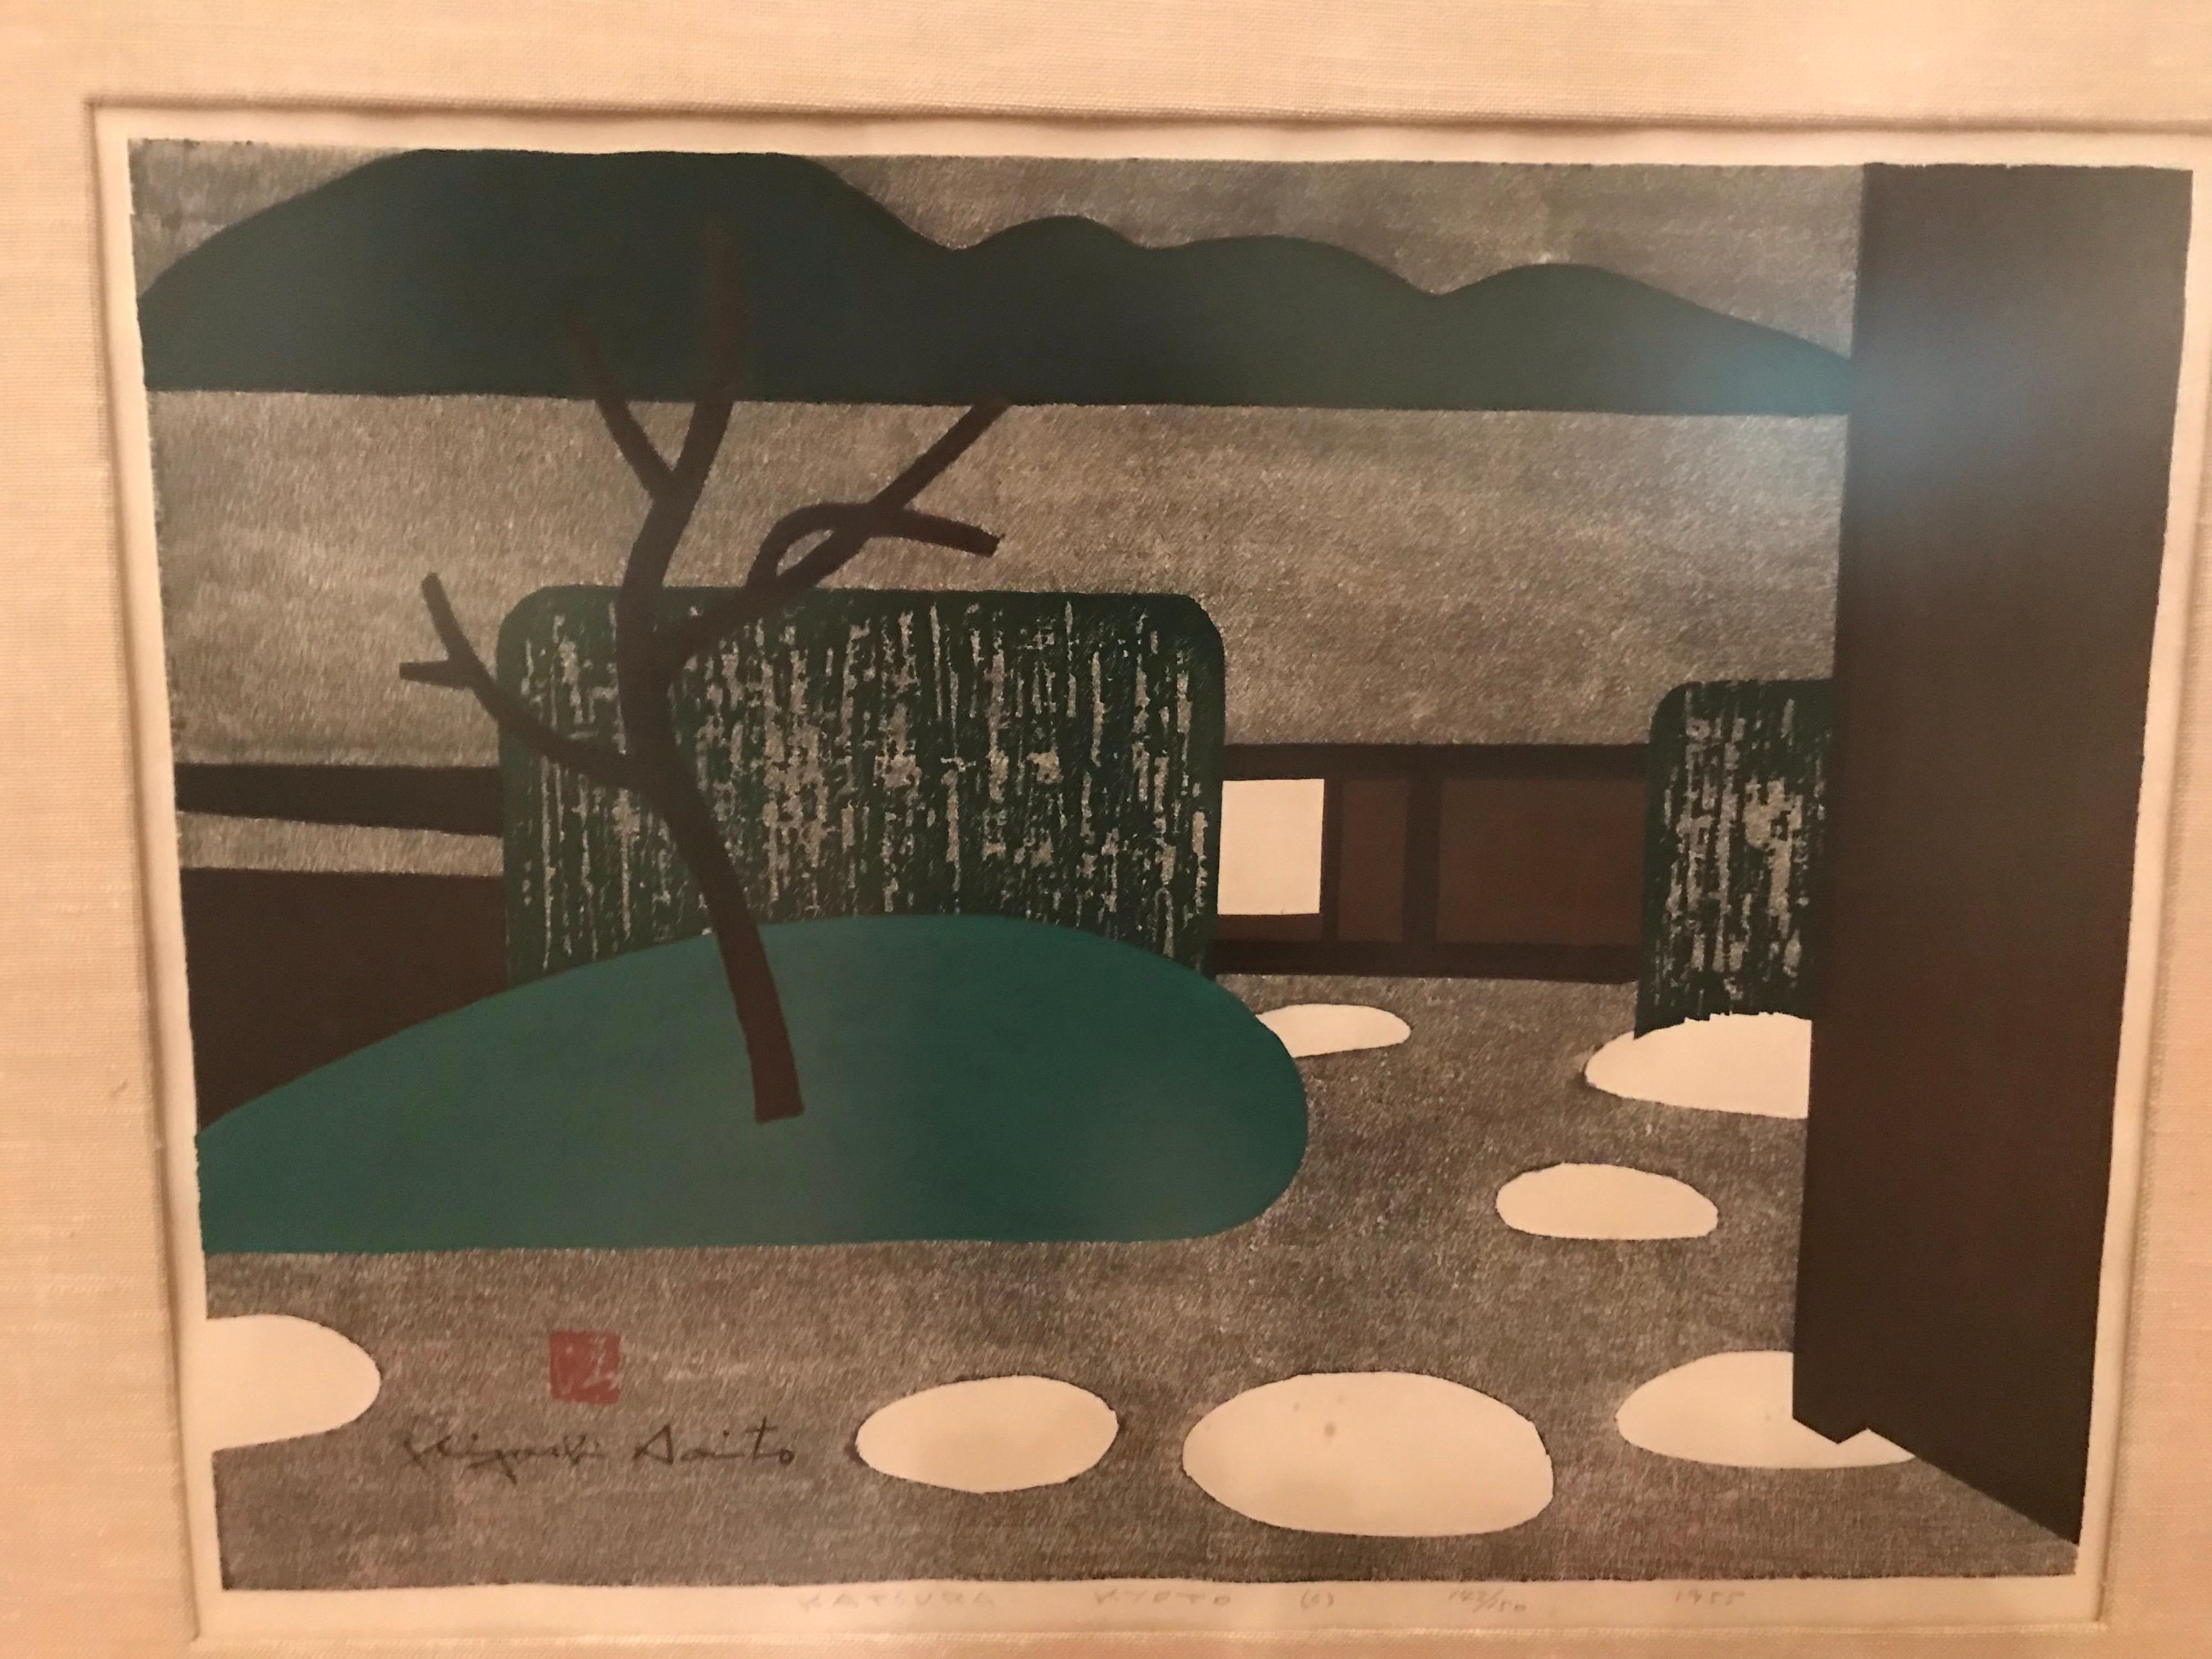 This lithograph is numbered 142/150 from 1955 and titled Katsura Kyoto (6) 
It has a very modern look and is in original midcentury frame.